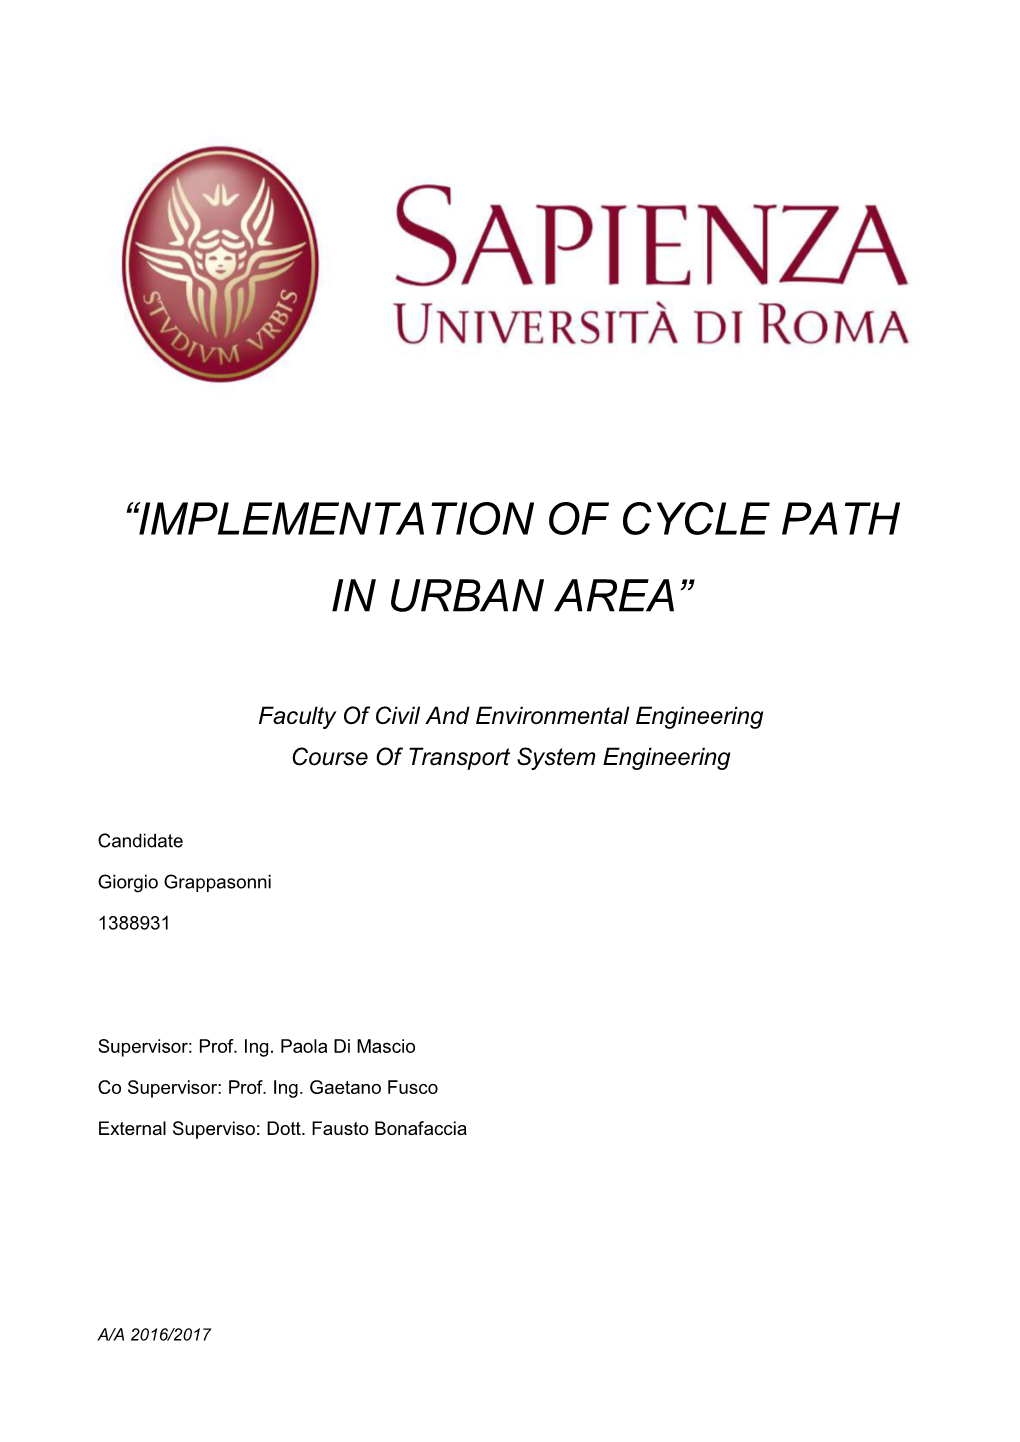 “Implementation of Cycle Path in Urban Area”